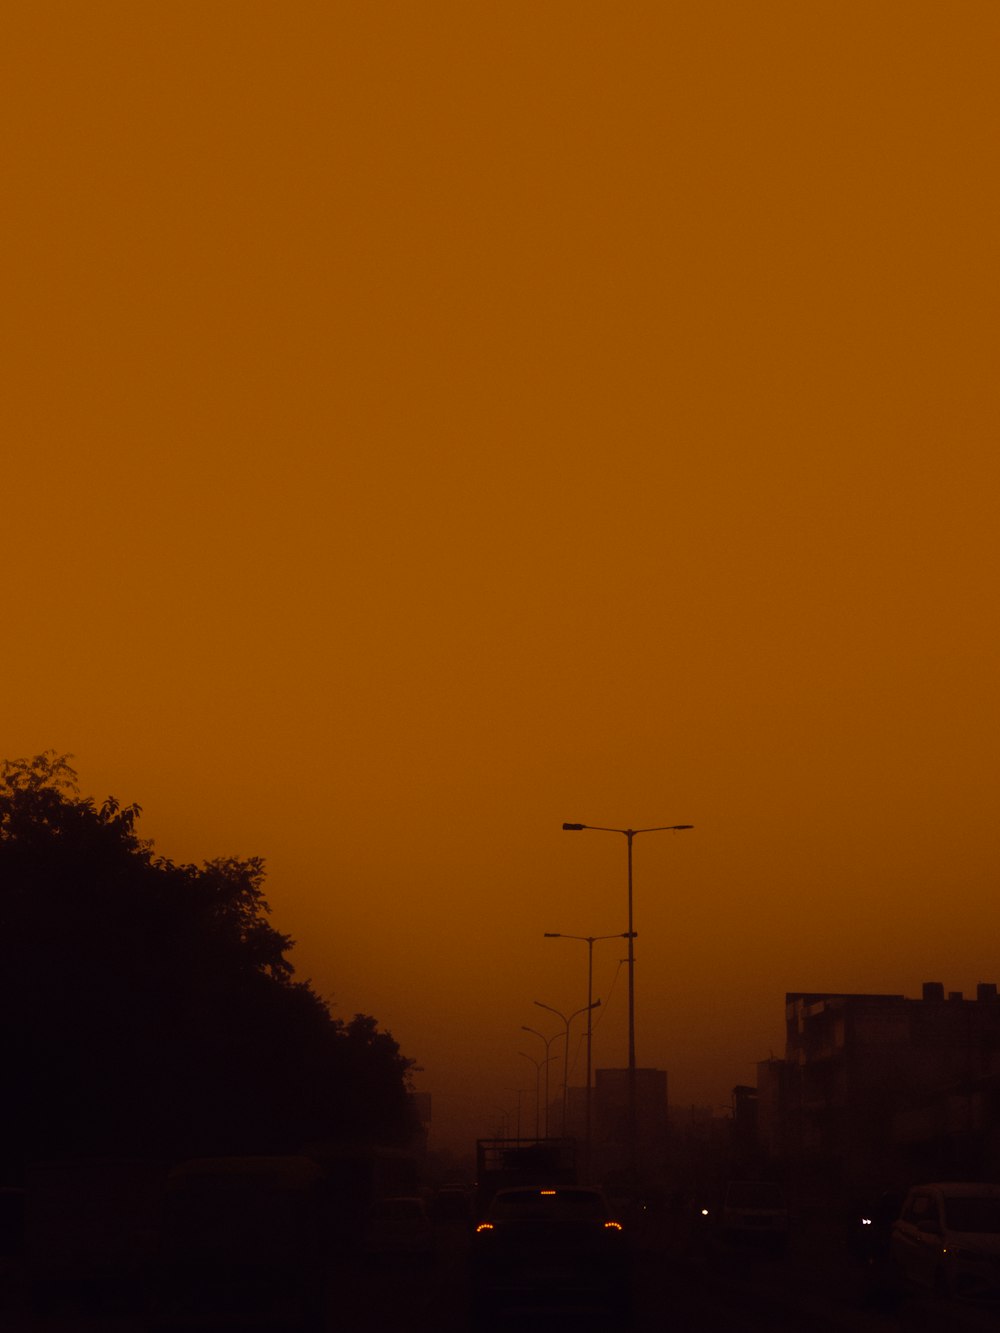 an orange sky over a city street filled with traffic